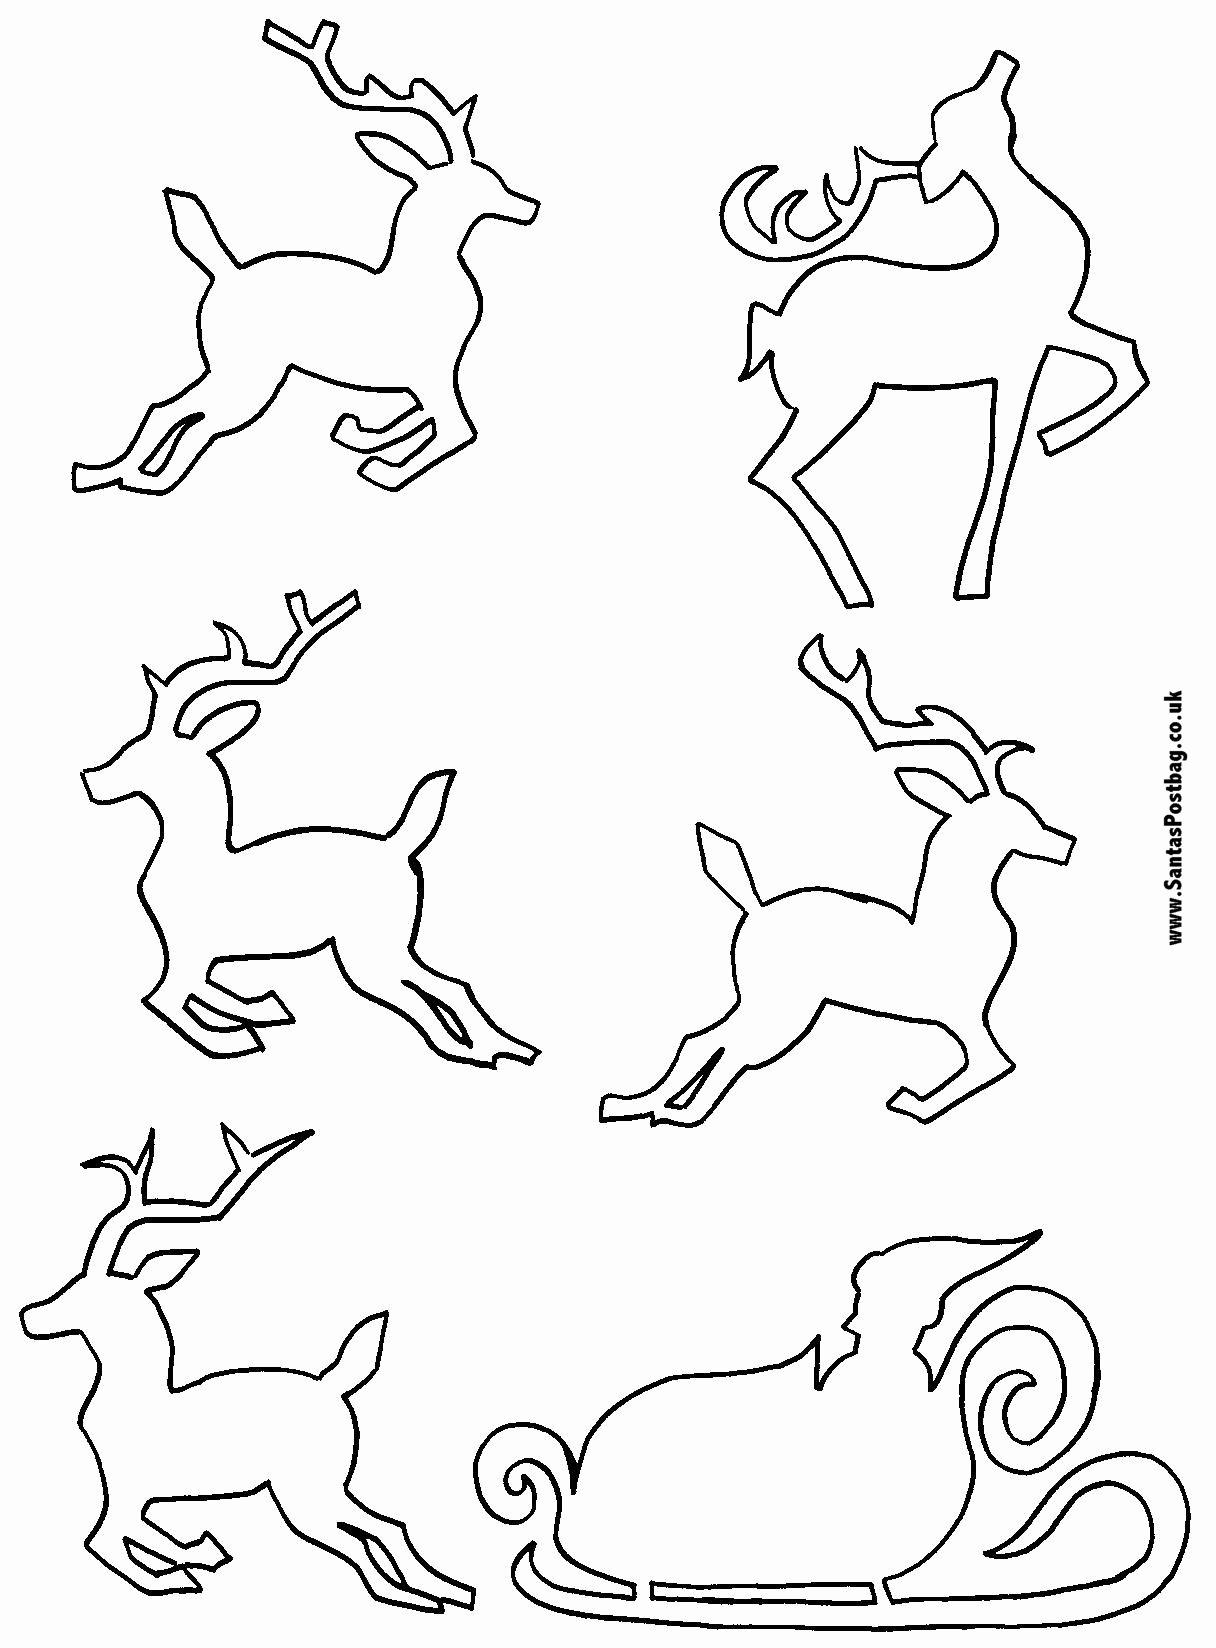 Reindeer Template Cut Out Unique Santa and Reindeer Coloring Pages Printable